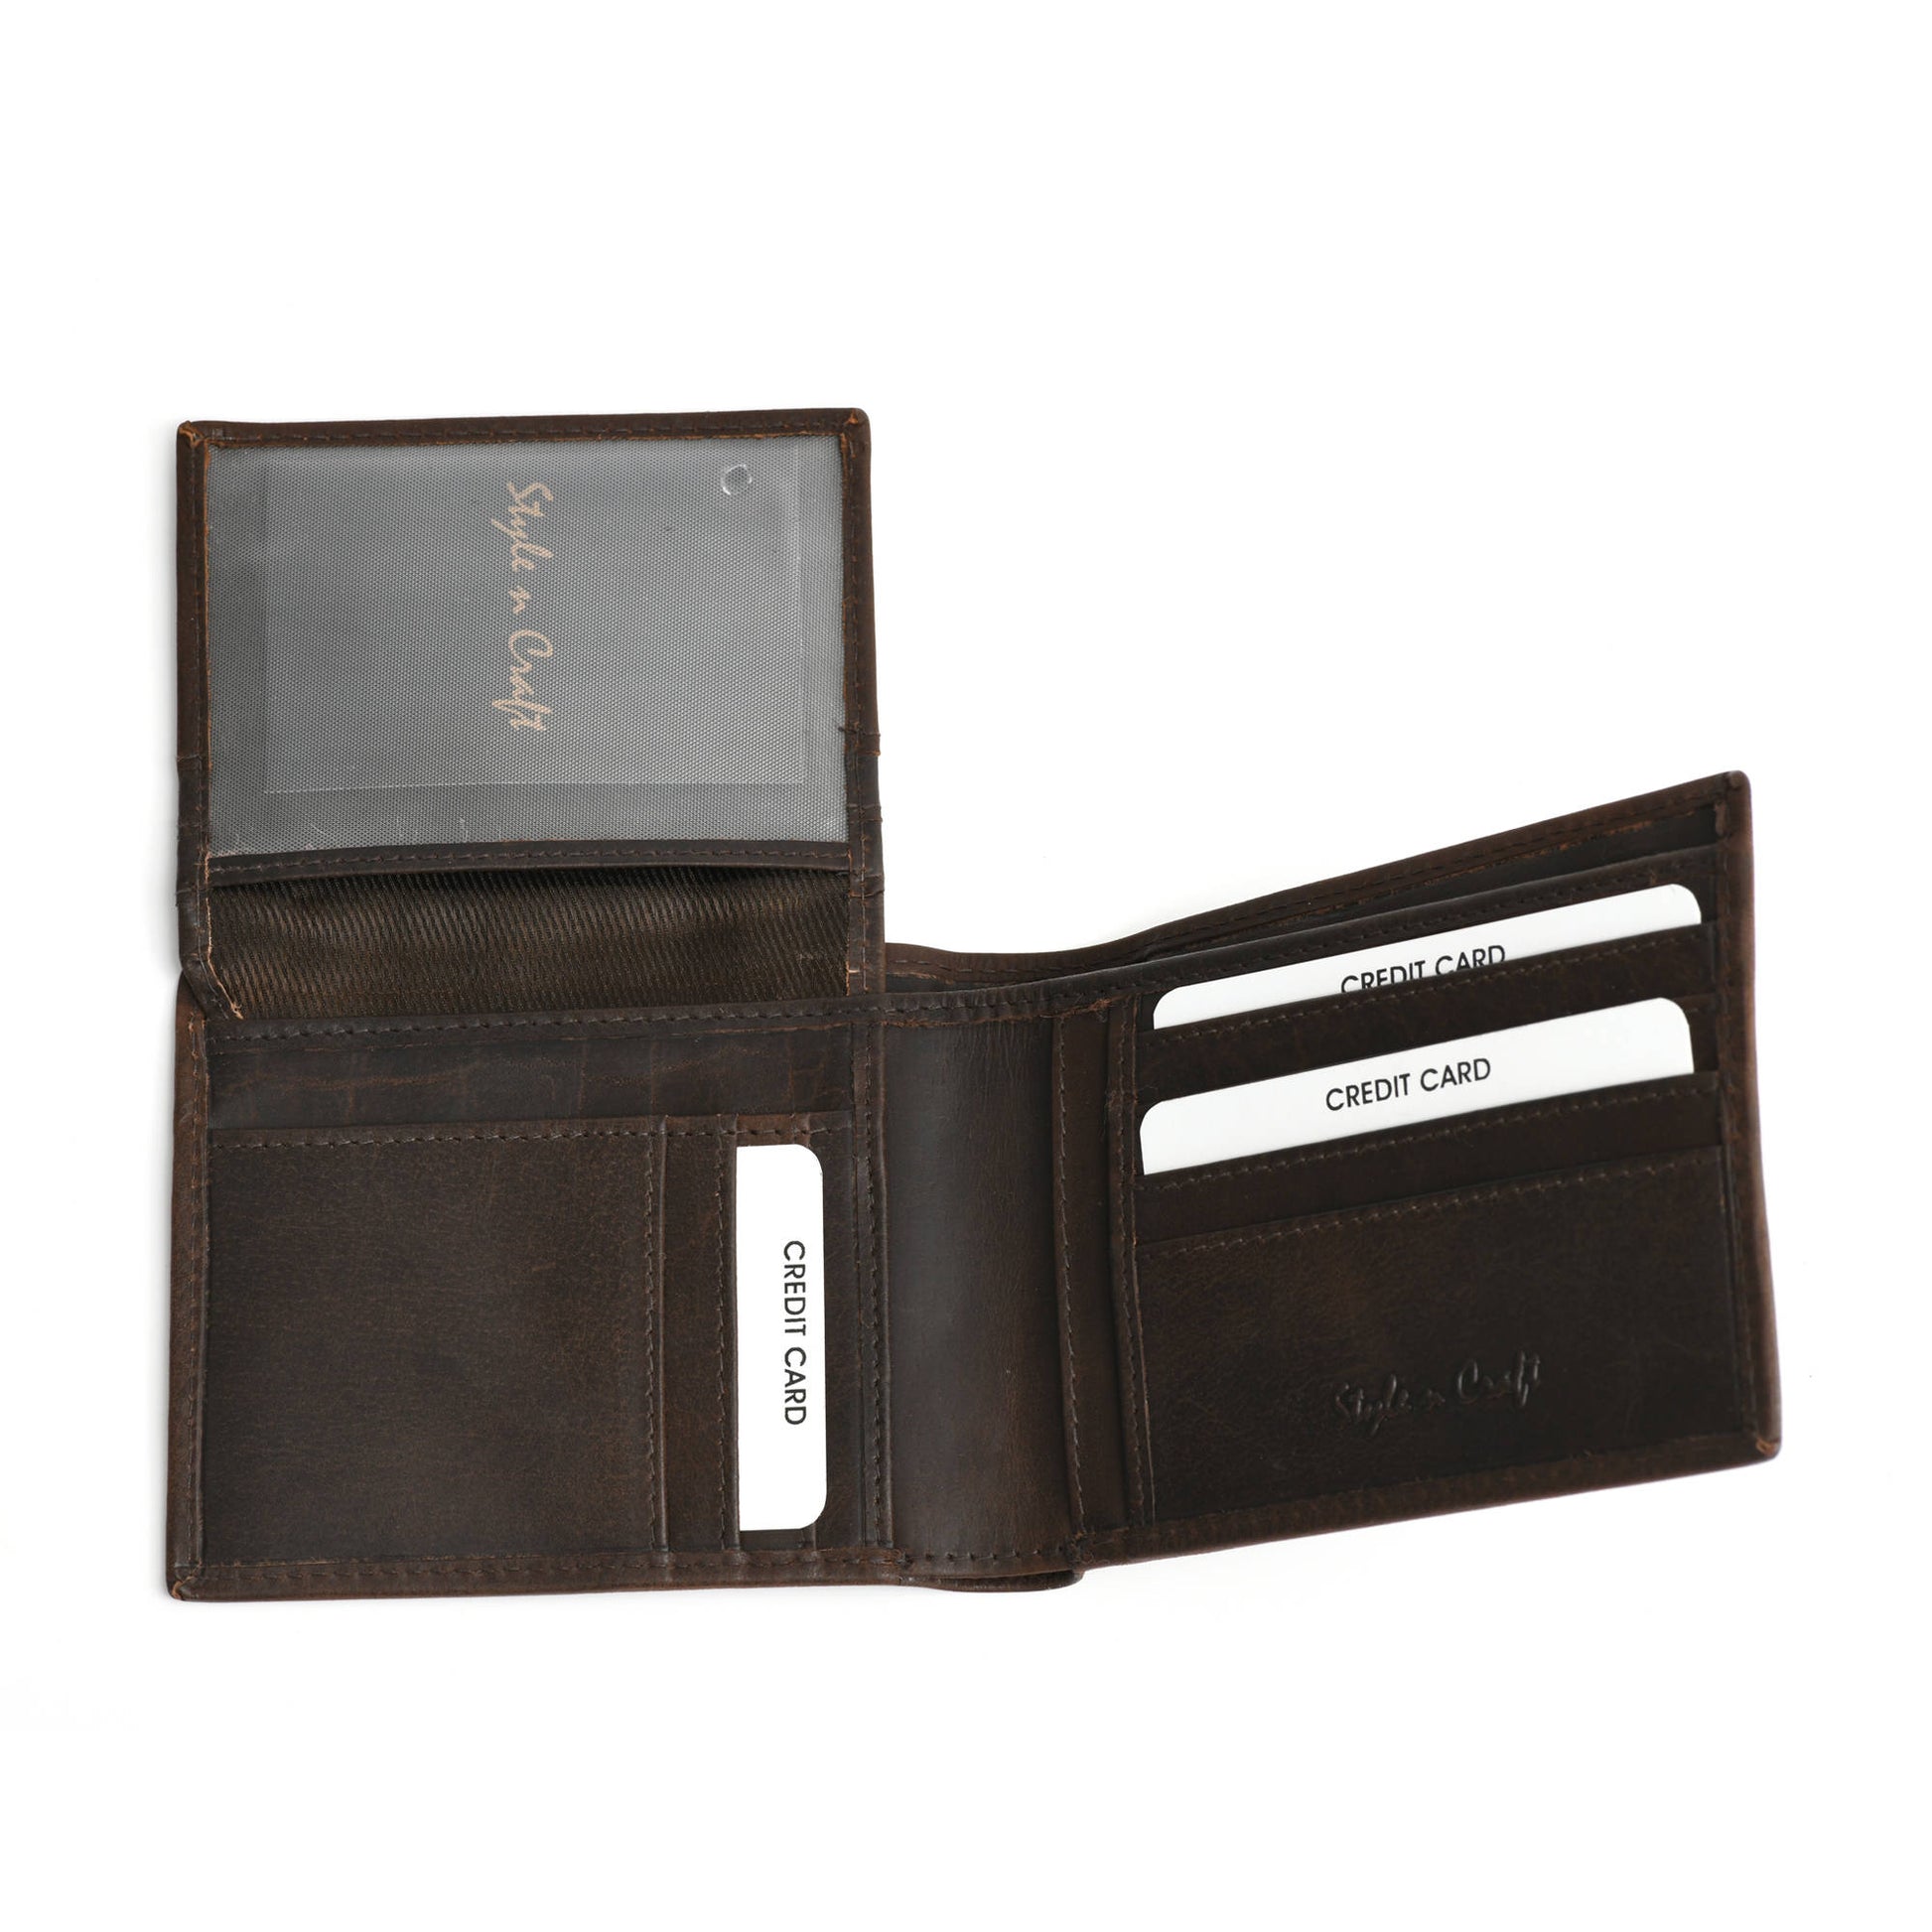 Style n Craft 391004 Bi-Fold PassCase Wallet with Flap in Dark Brown Top Grain Leather - Open View showing Pockets & ID Window under Flap